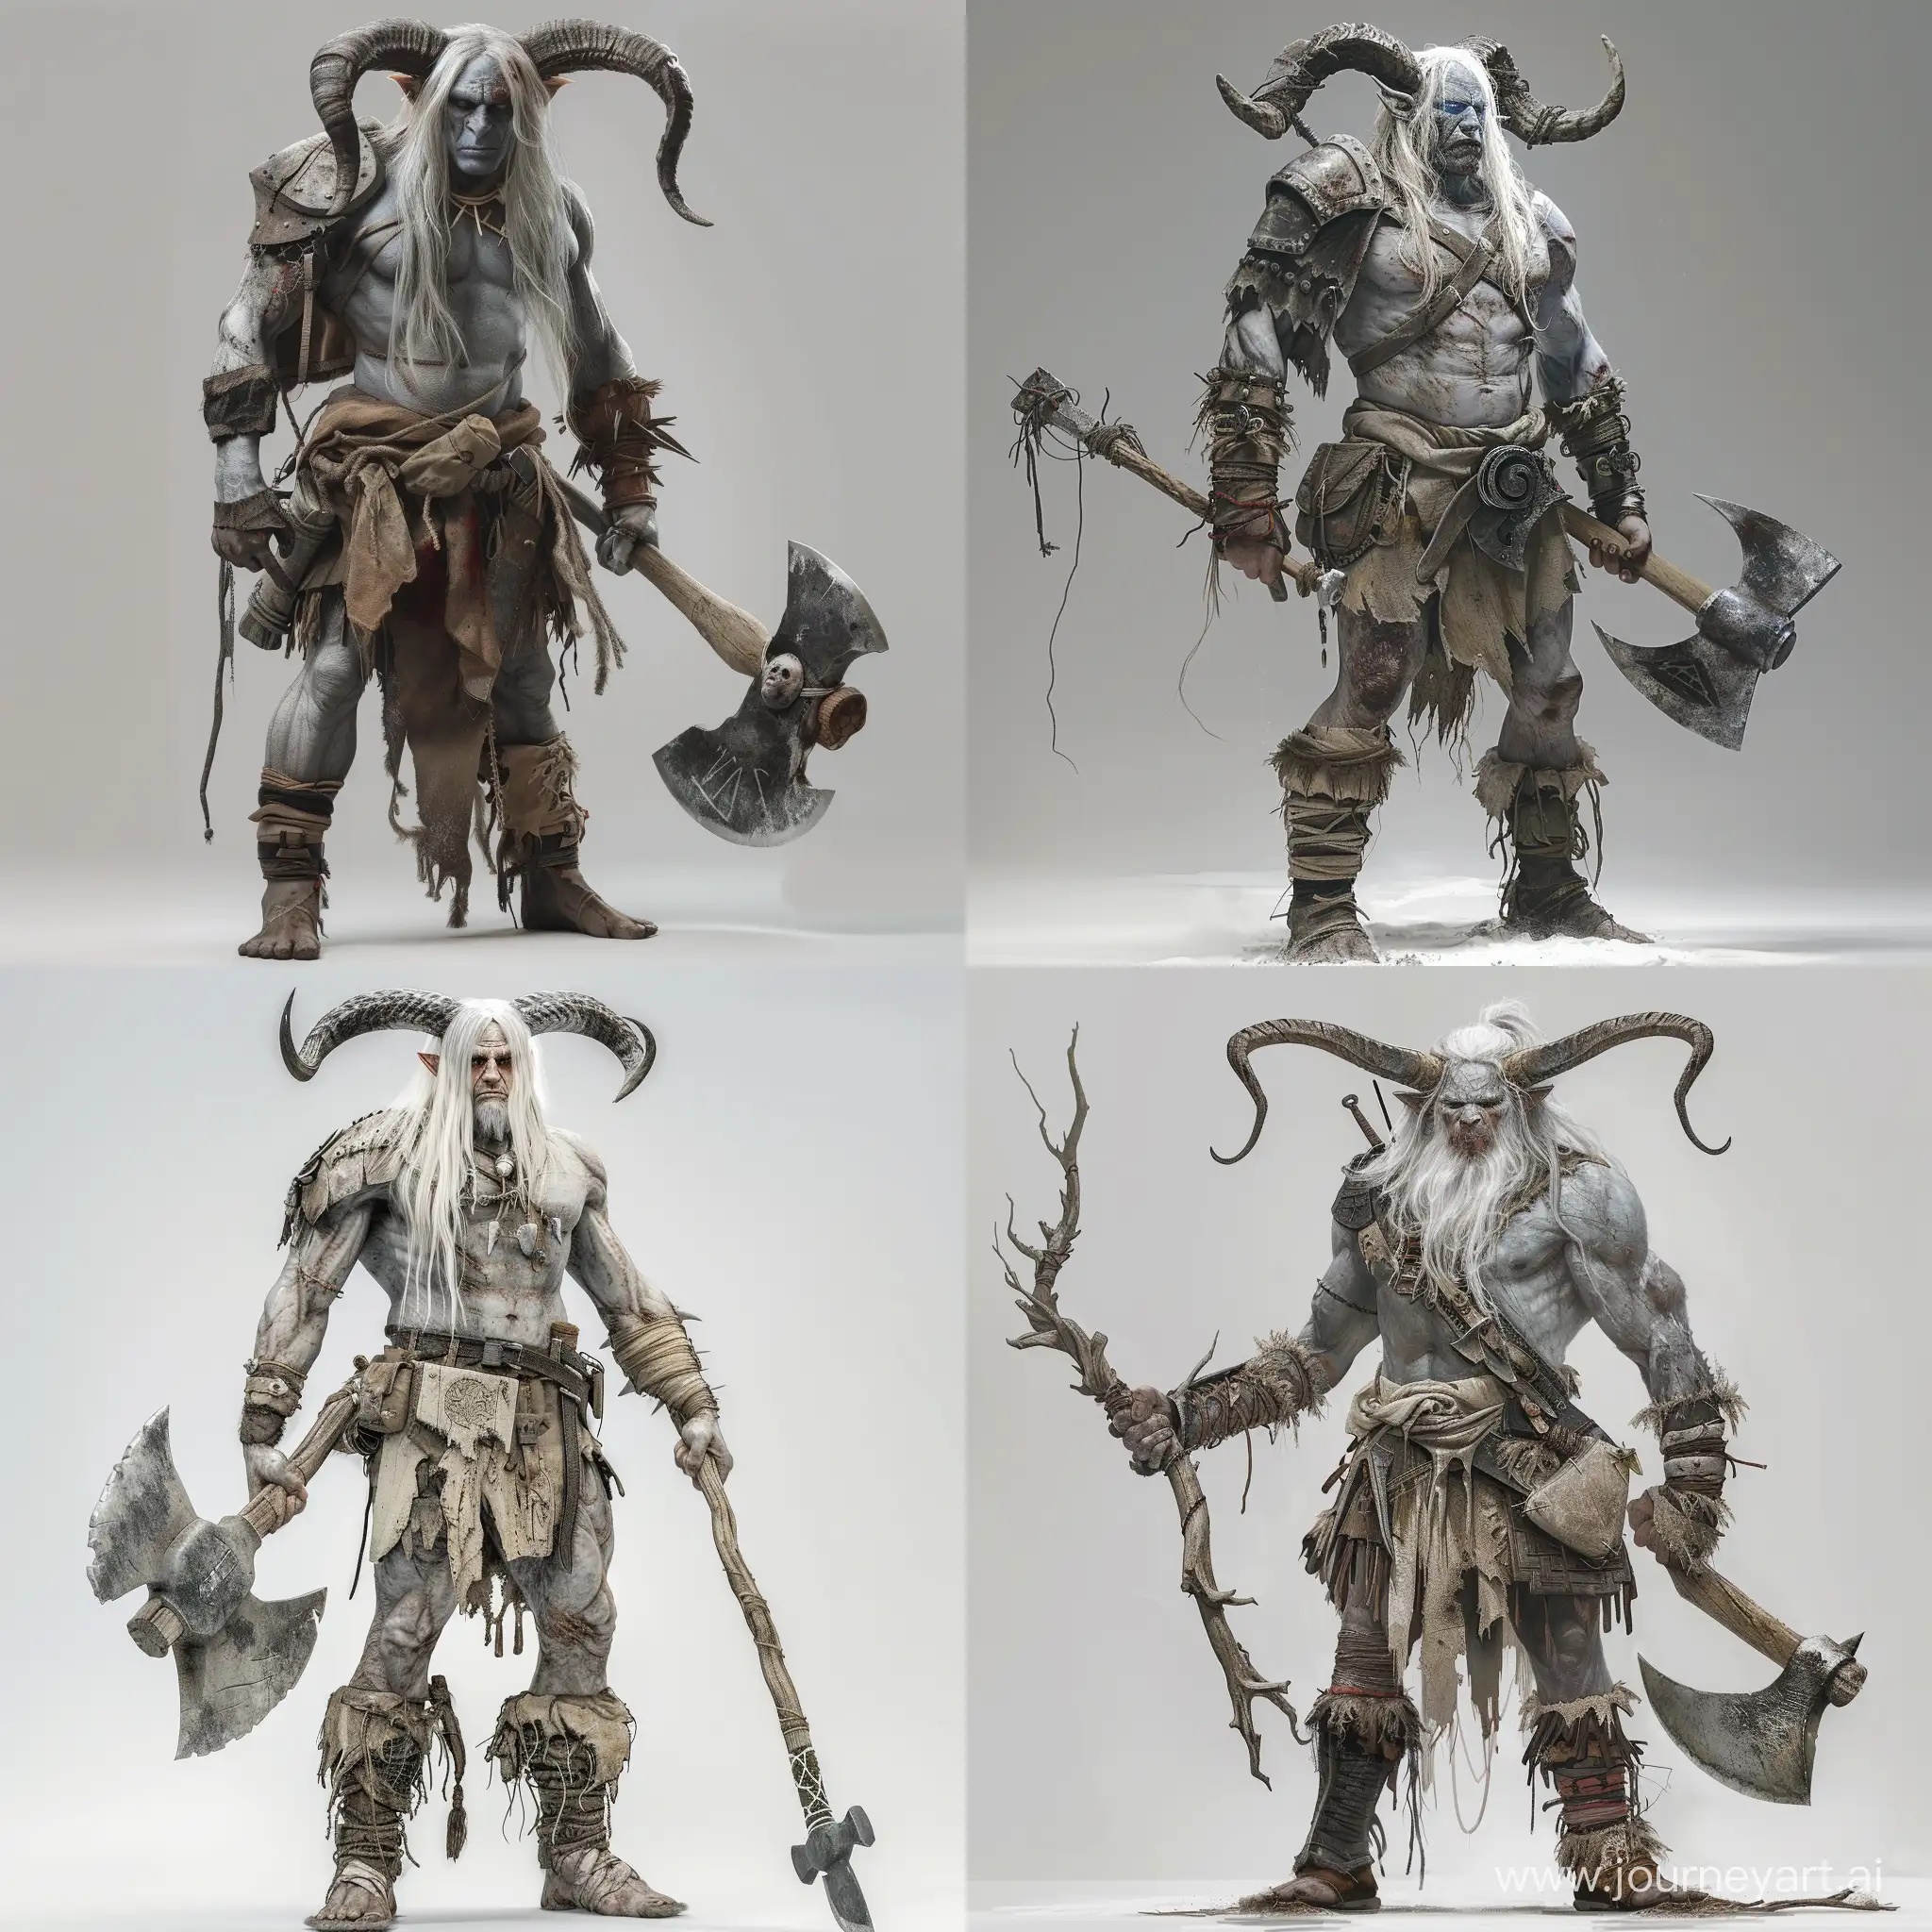 Majestic-GreySkinned-Warrior-with-Horns-Wielding-Enormous-Axe